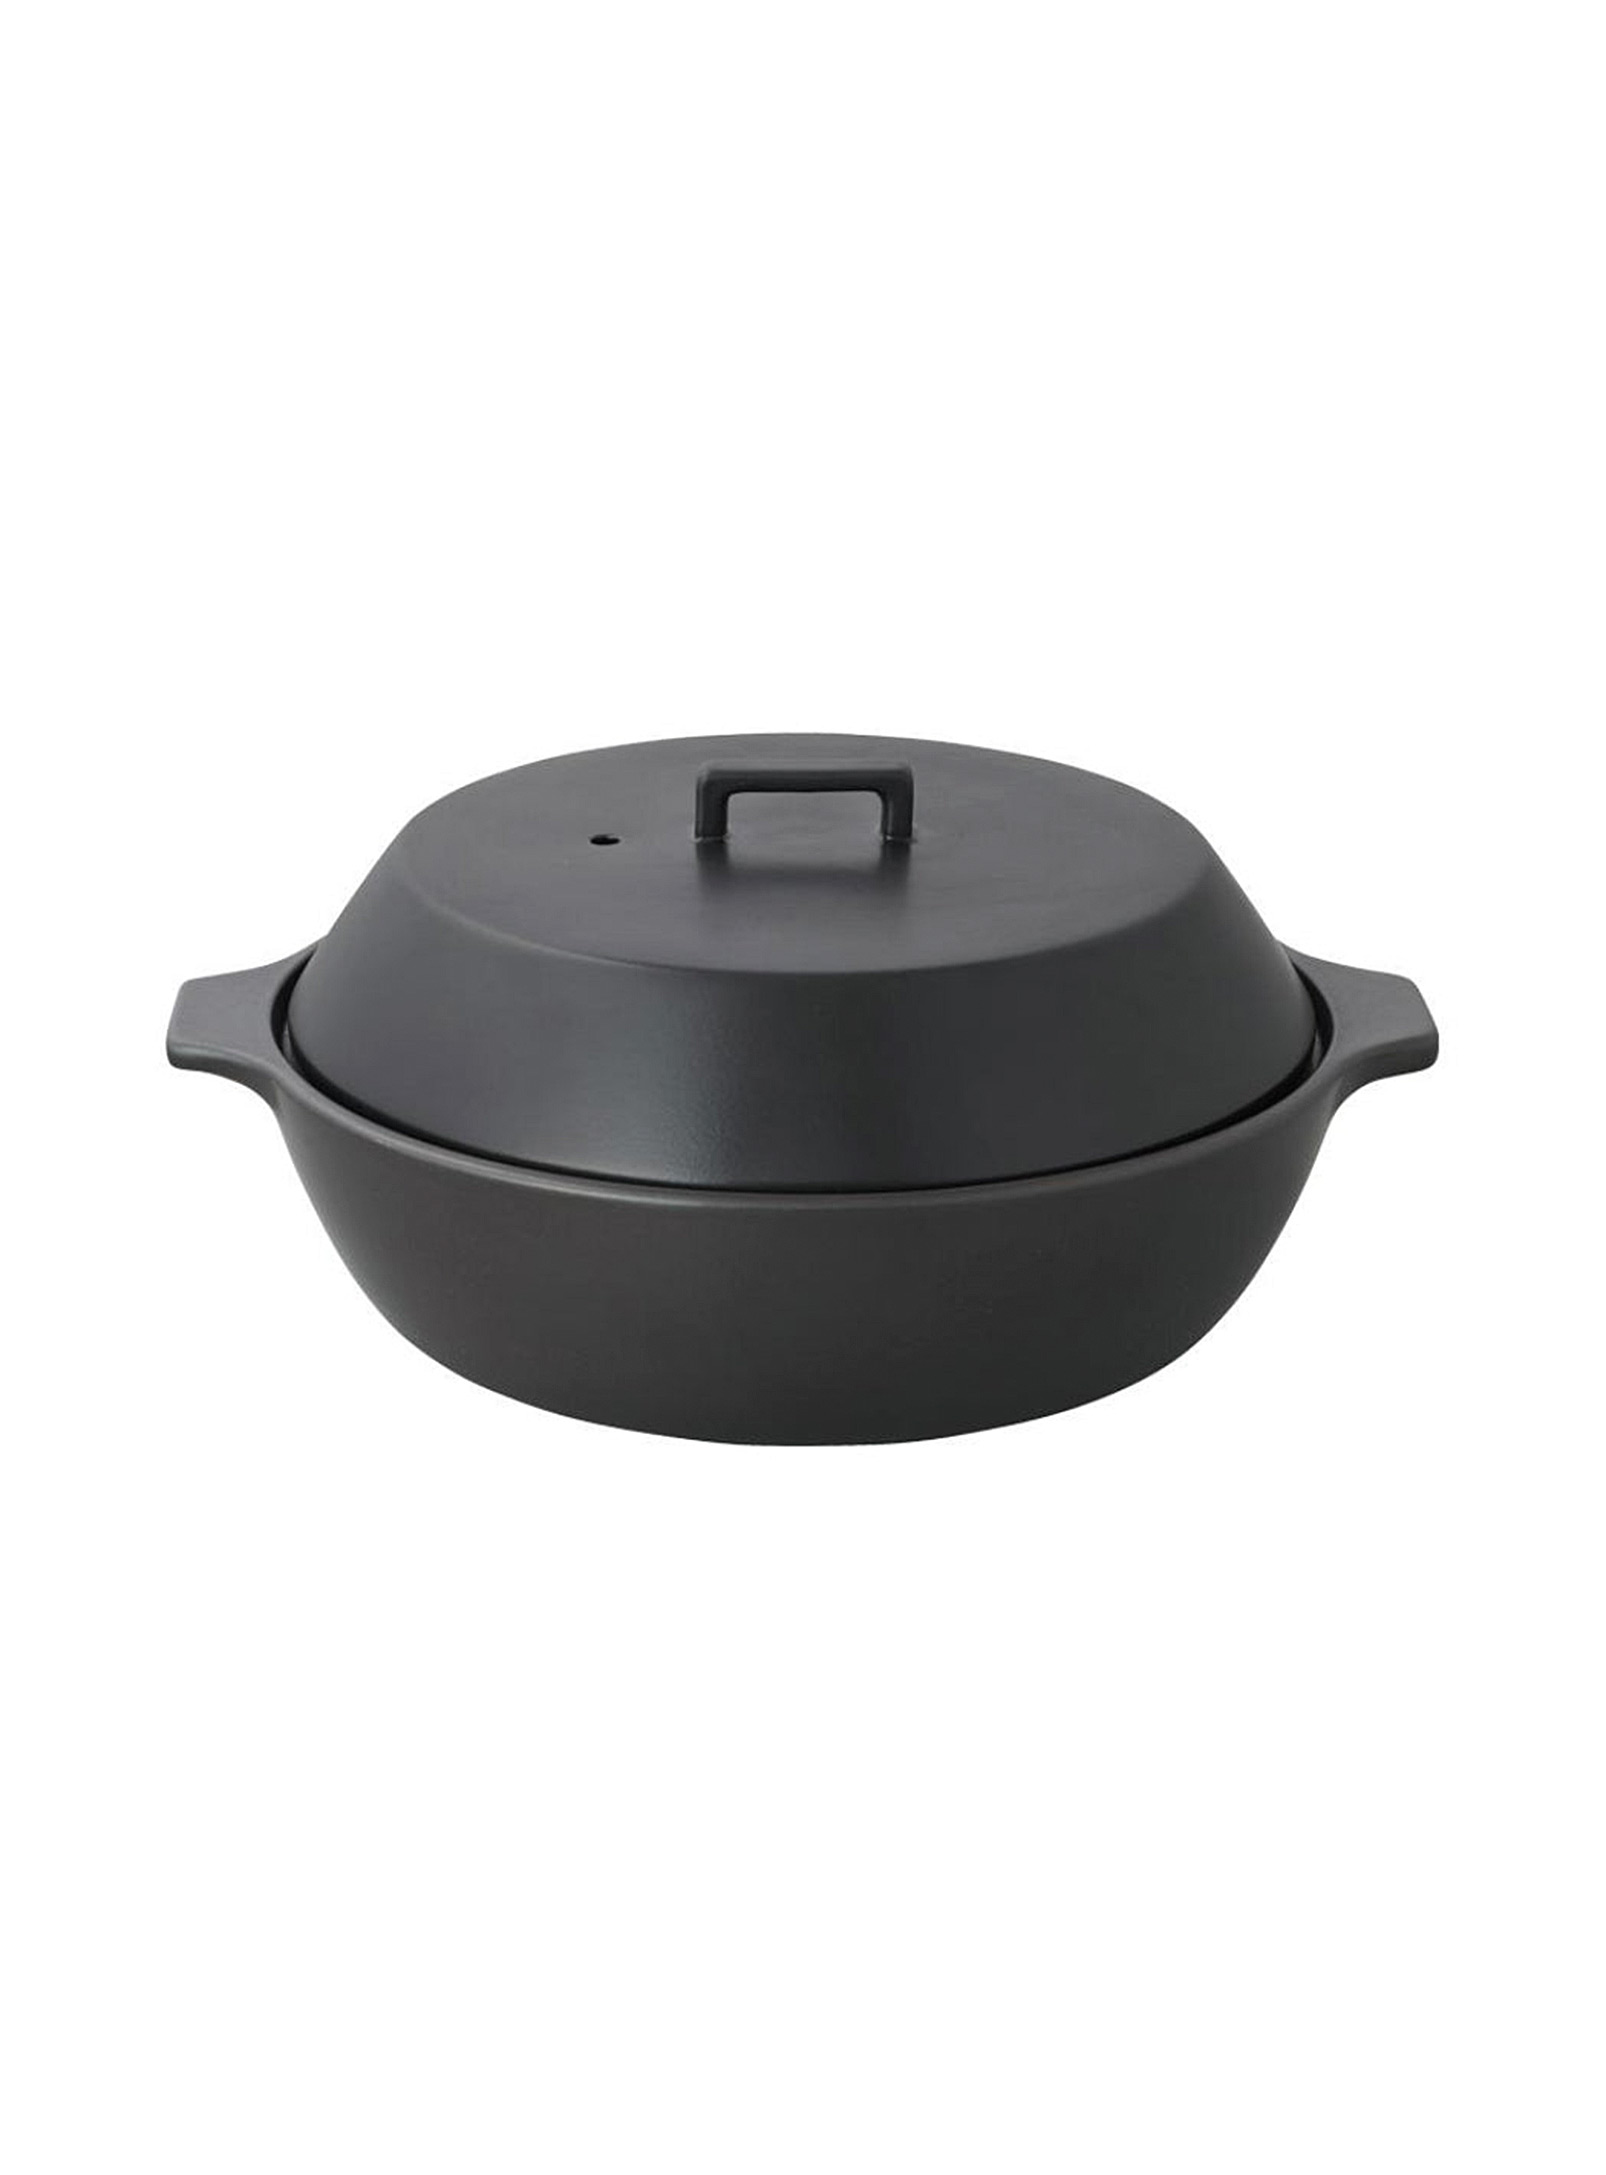 Kinto Donabe Large Dutch Oven In Black